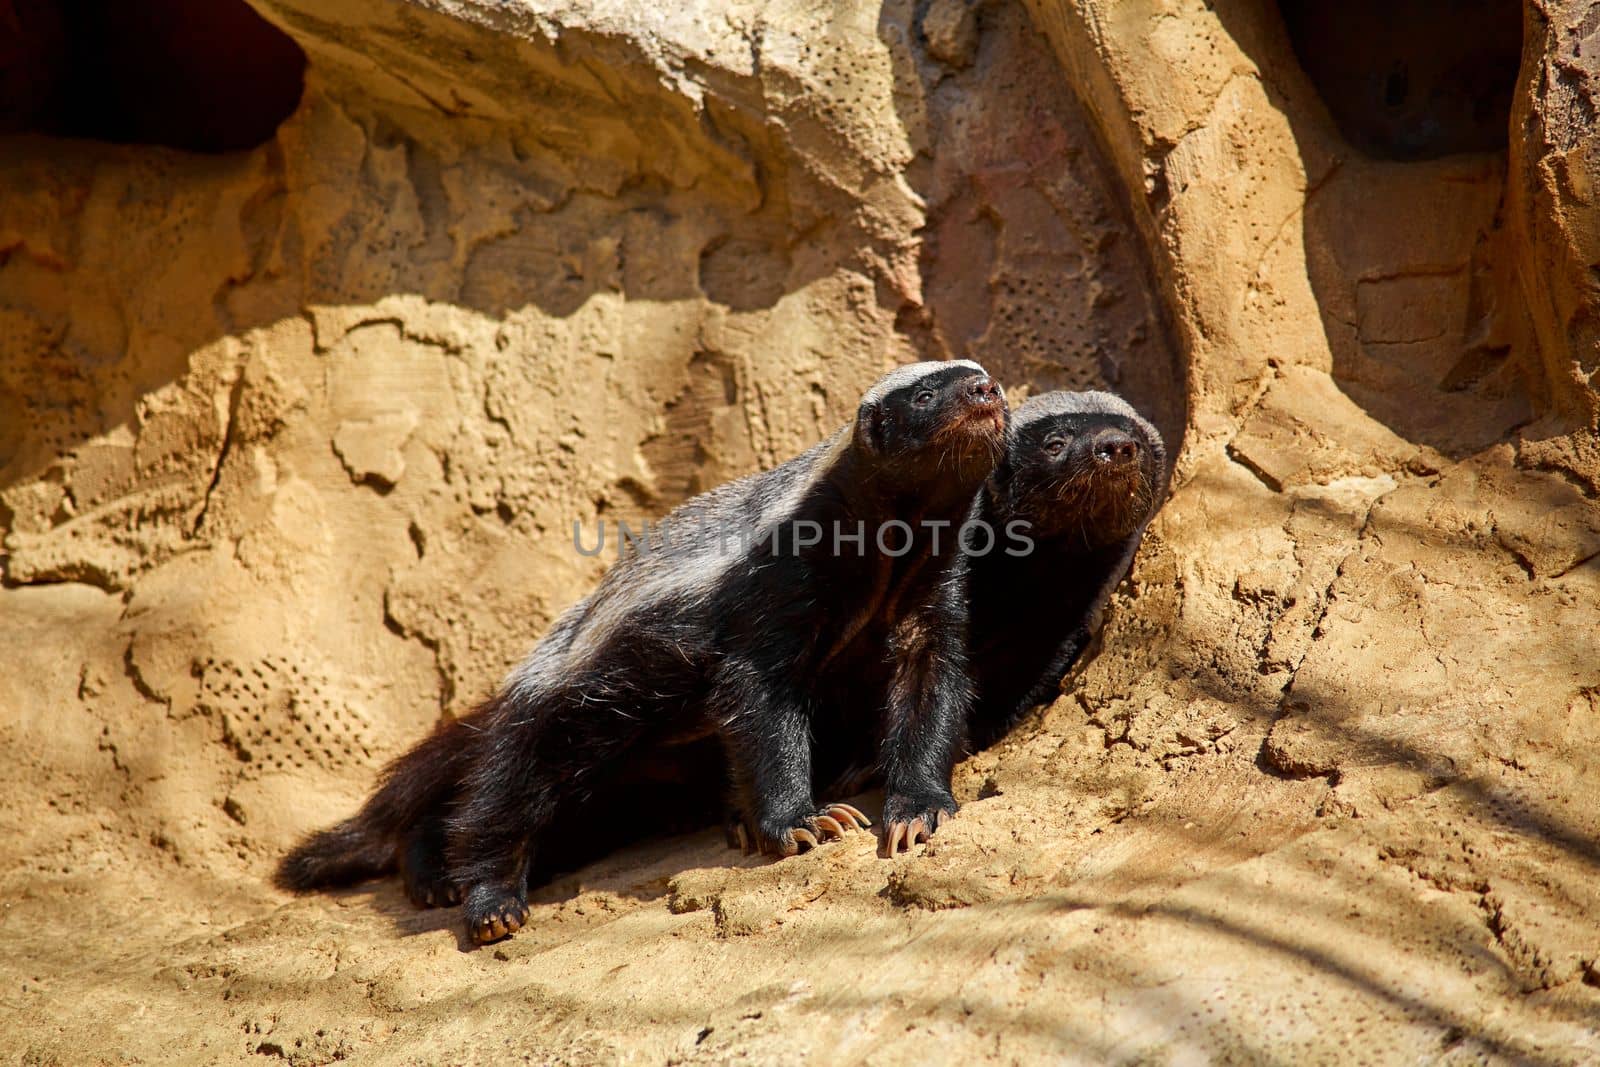 The honey badger basks in the sun on a stone at the zoo.